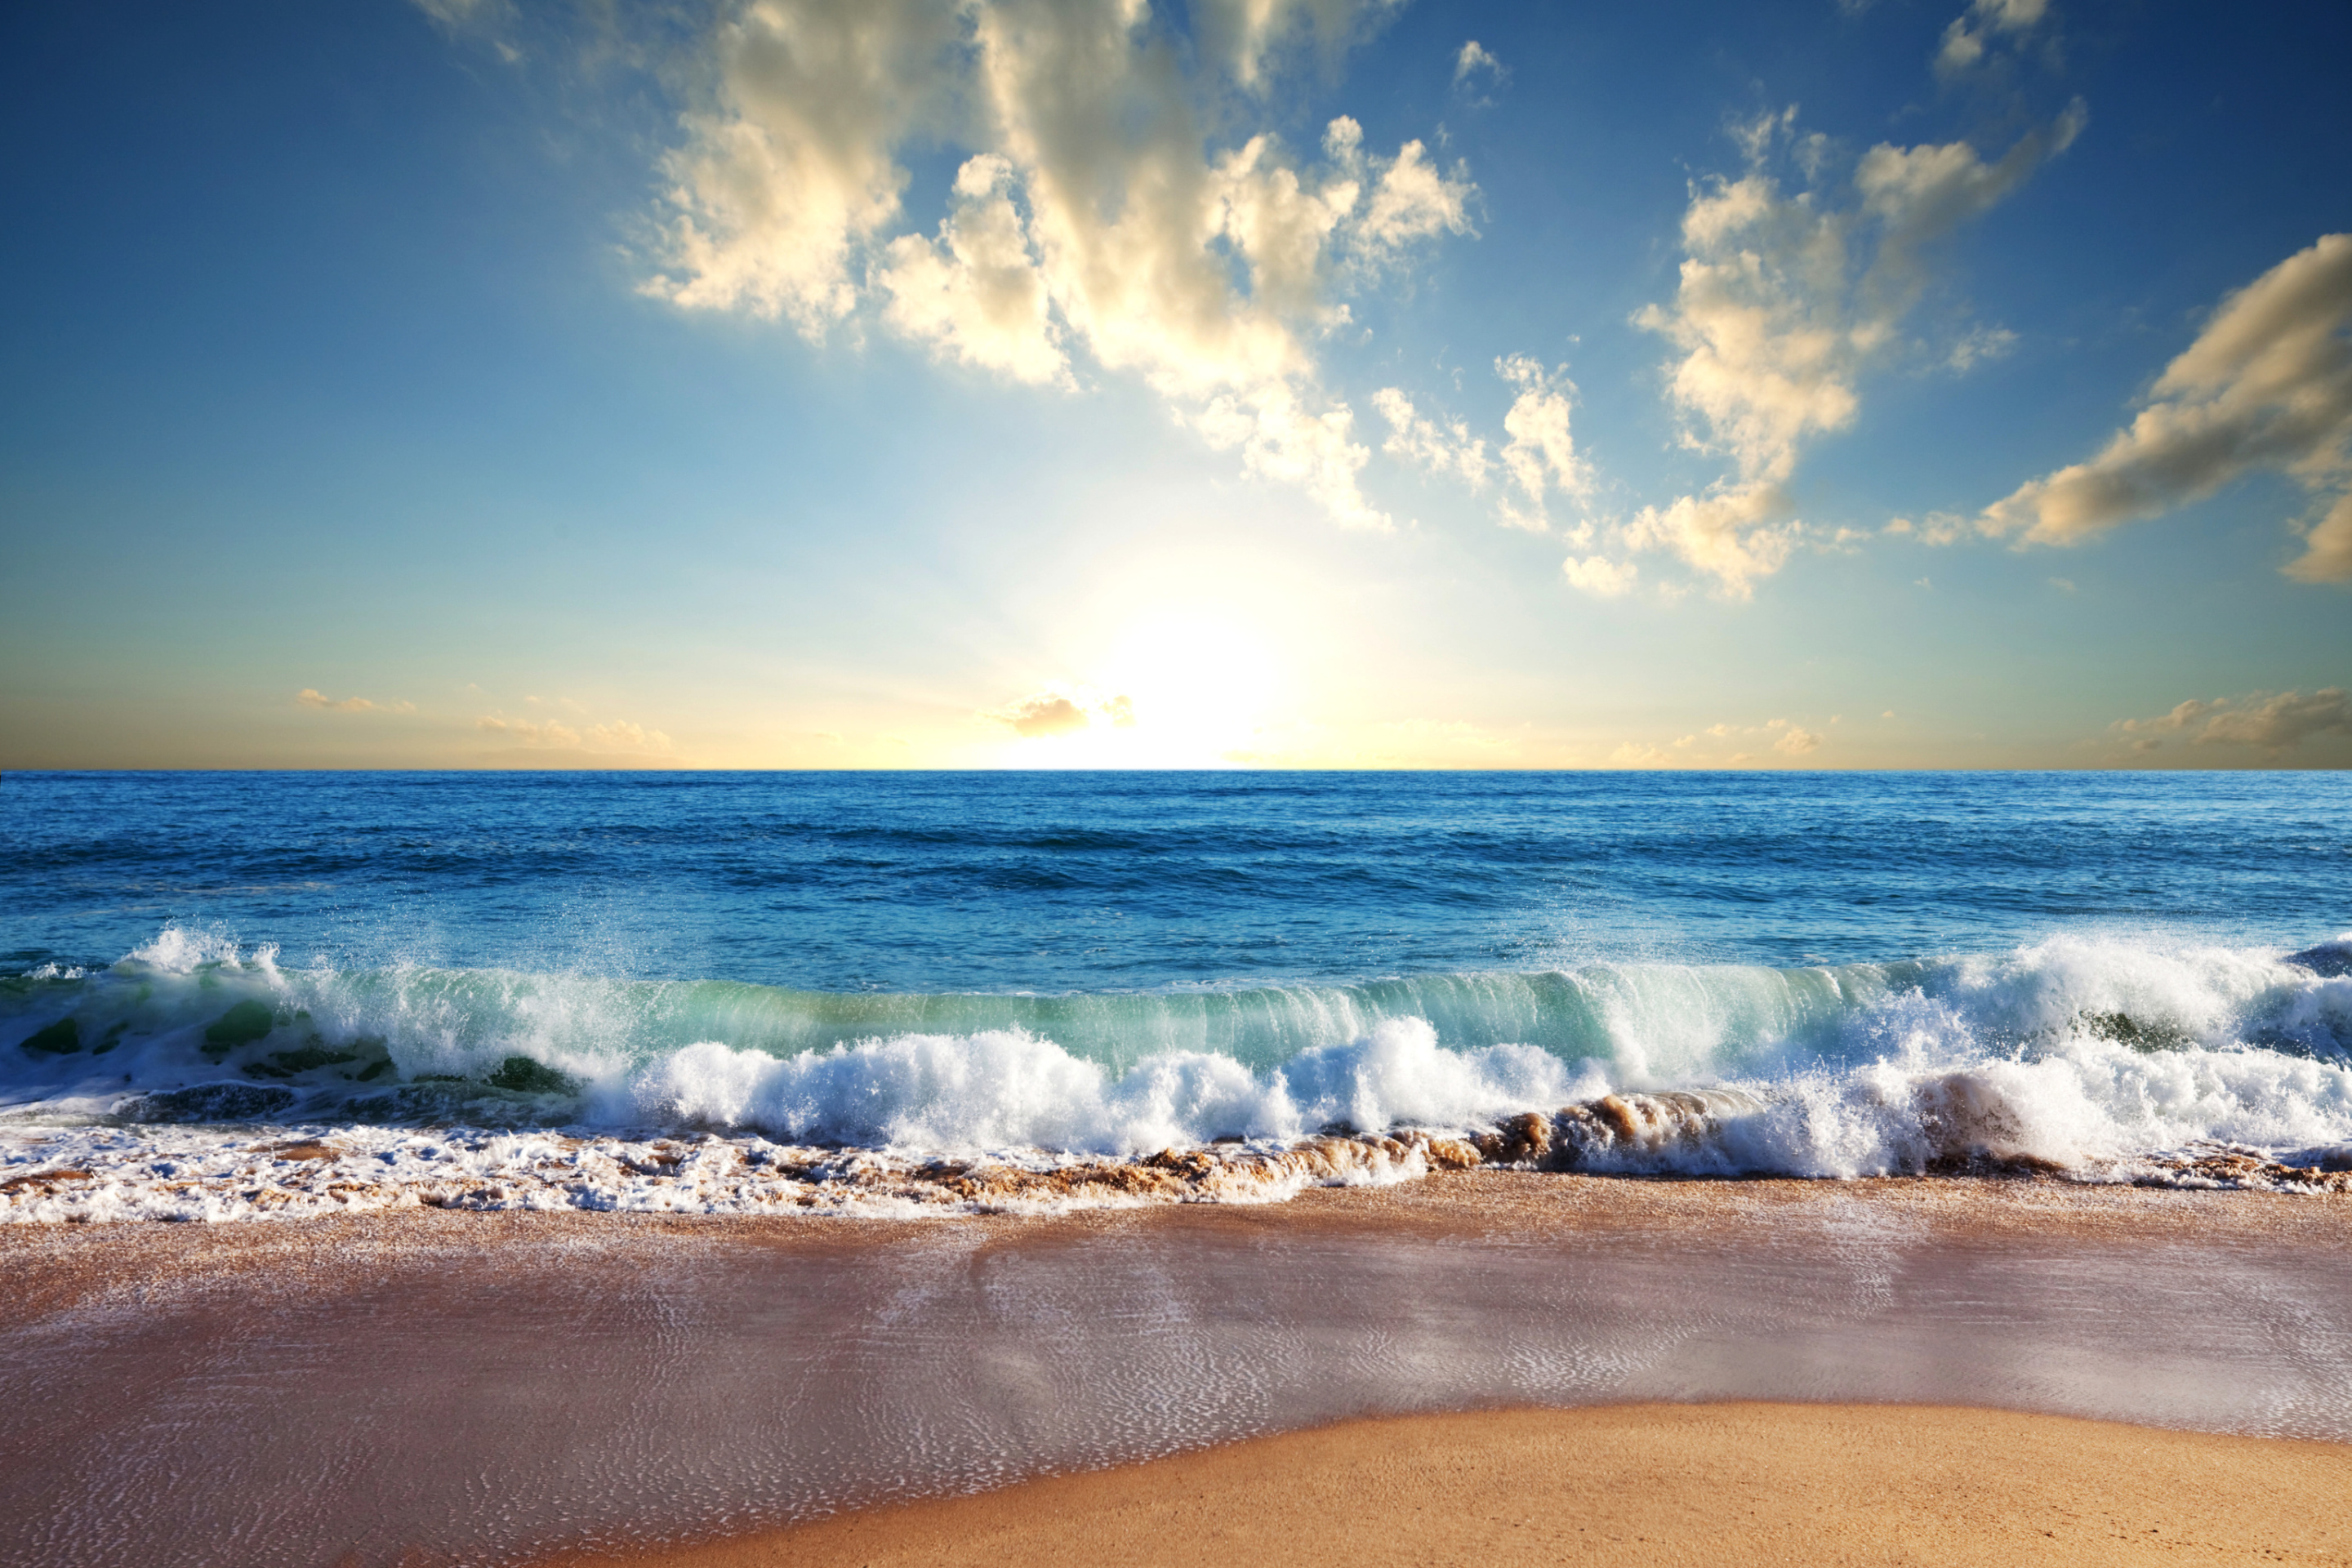 Beach and Waves wallpaper 2880x1920